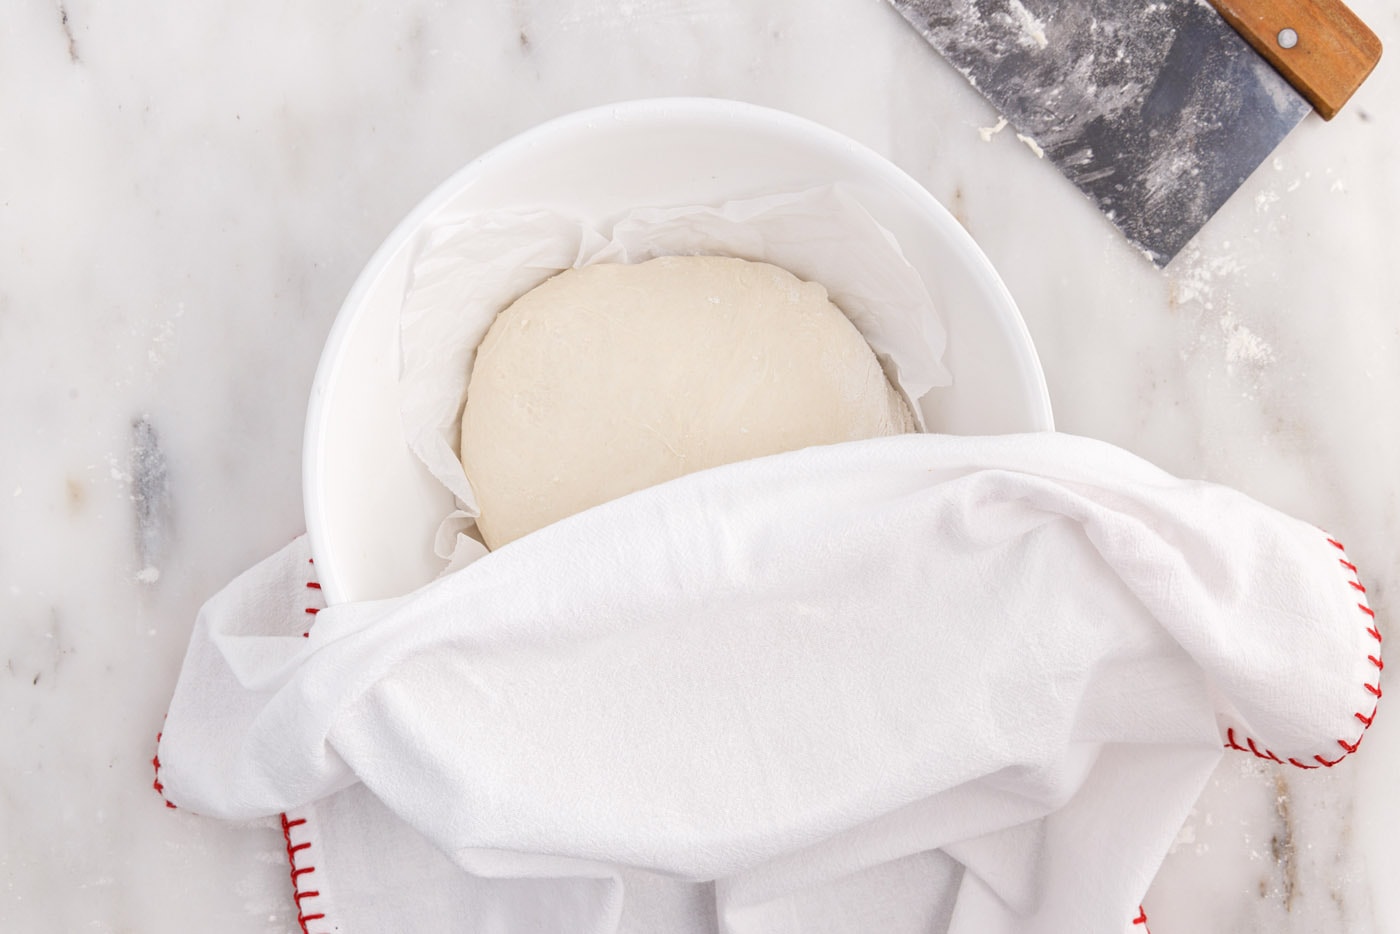 covering dough in a bowl with a towel